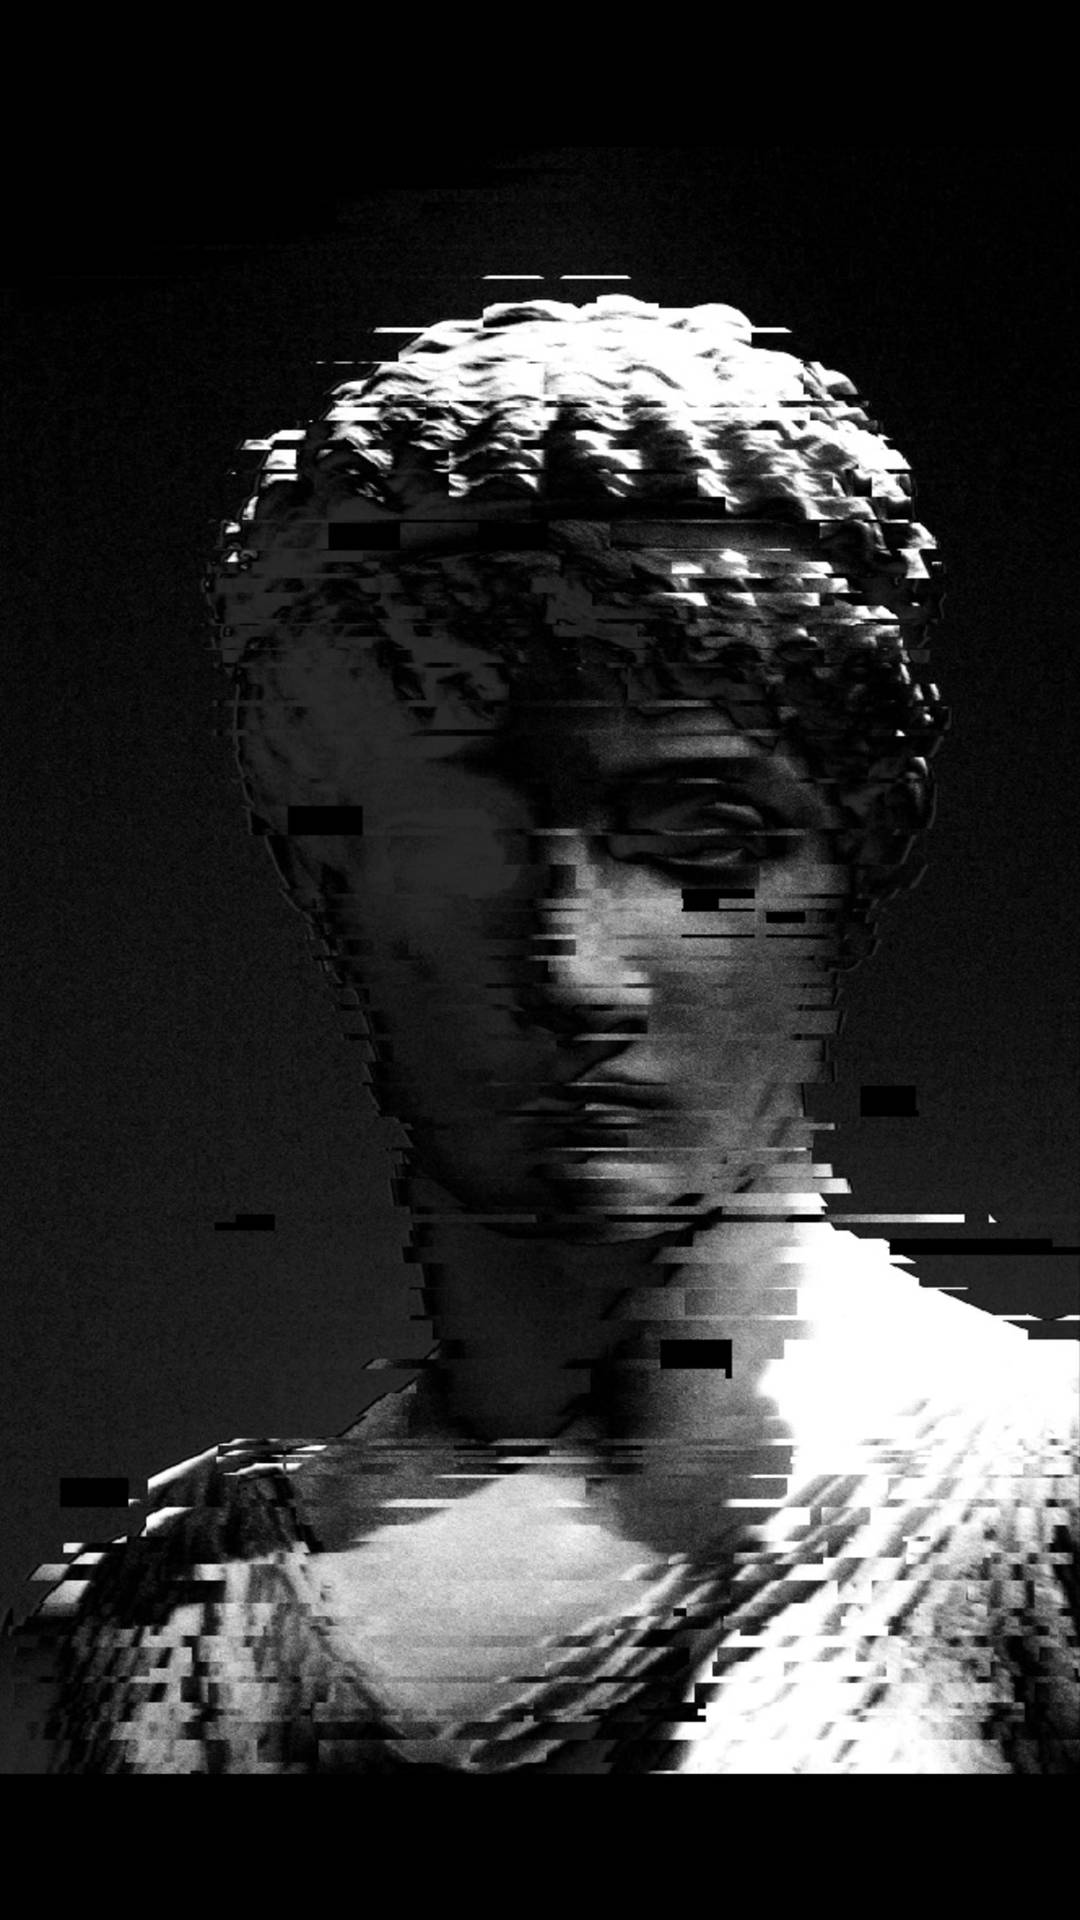 Glitchy image of a sculpture of a woman's head - Greek statue, statue